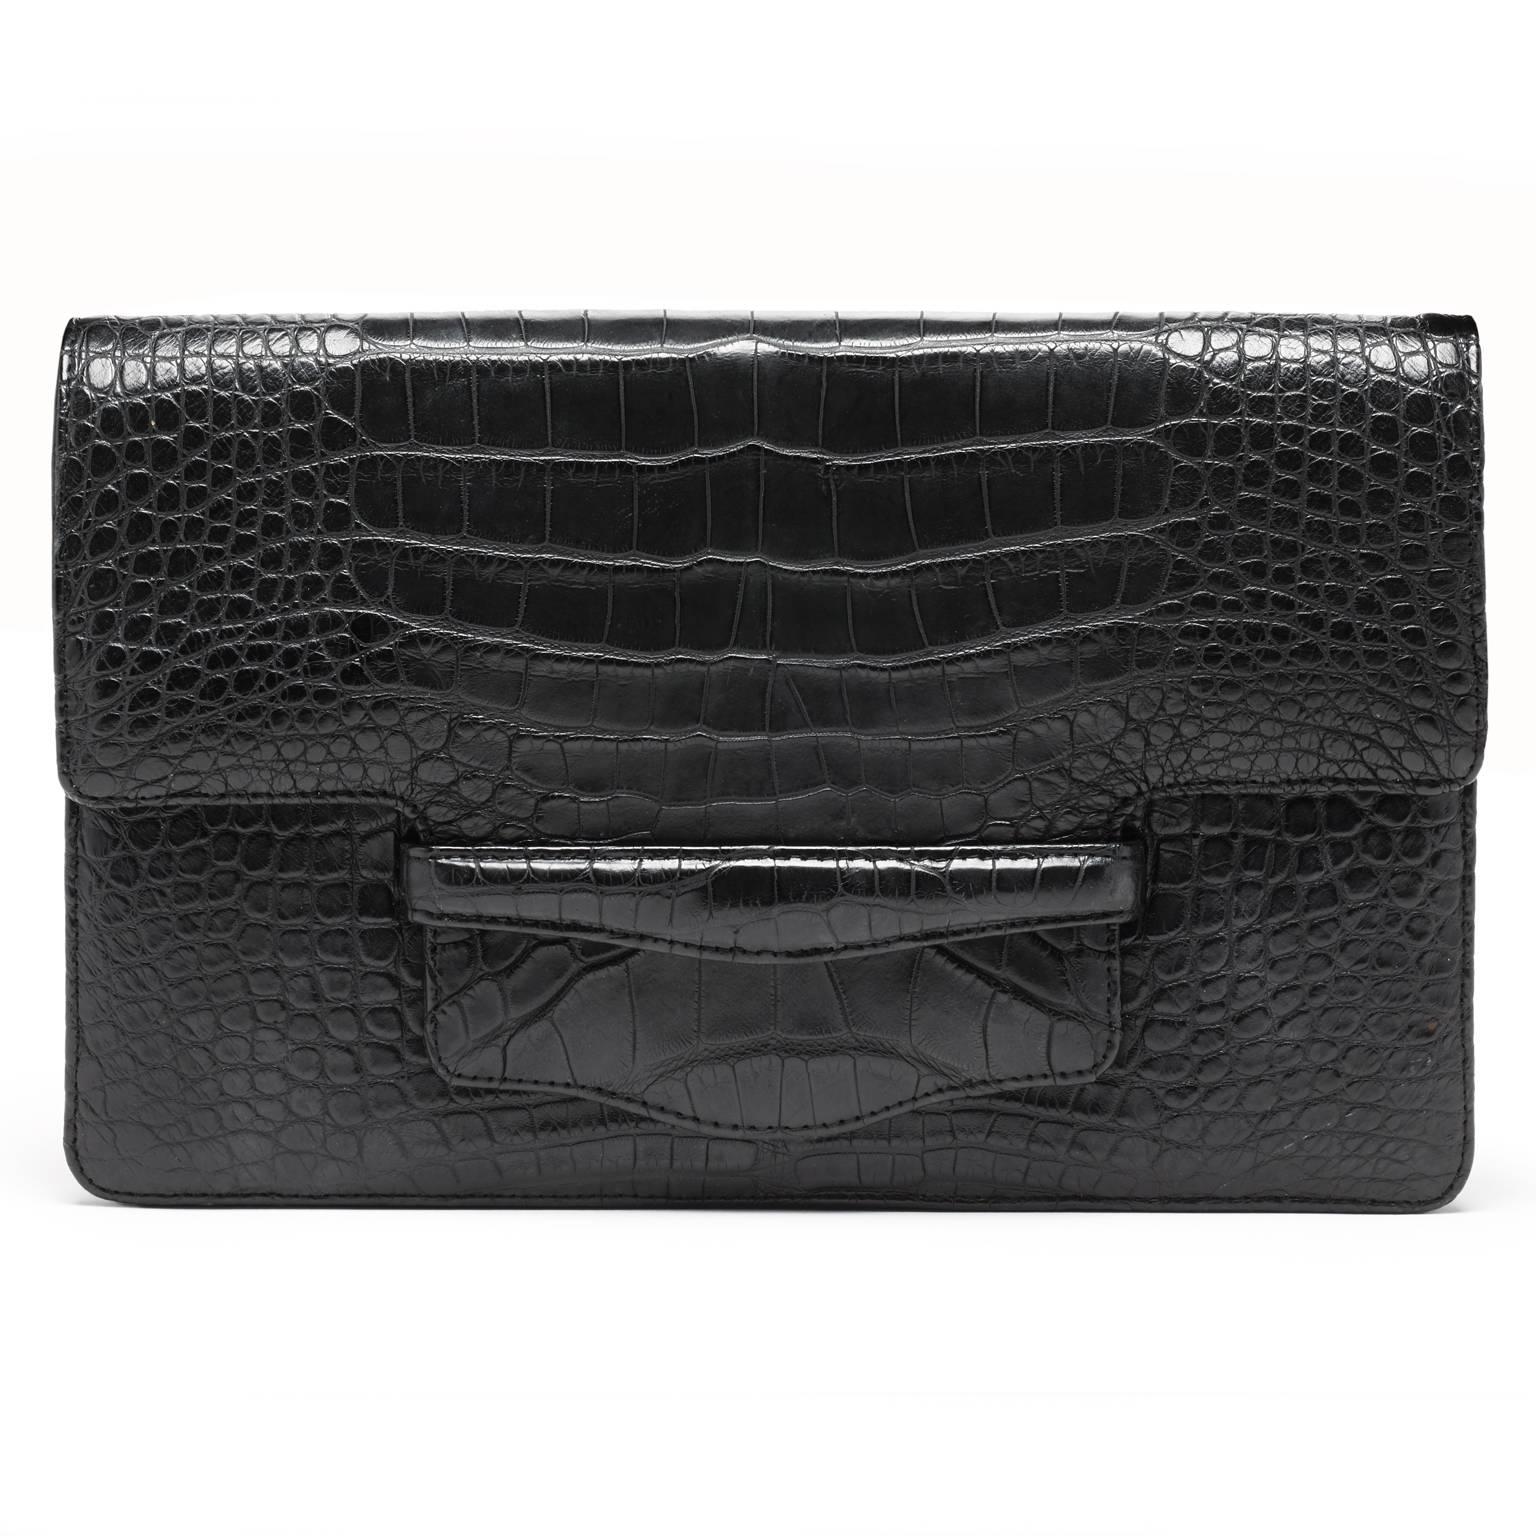 This matte black alligator clutch is fully lined in leather, with an inner zipper pocket. The adjustable alligator strap is joined to the bag with a set of gold sculpted hands on both sides. The strap can extend from 18